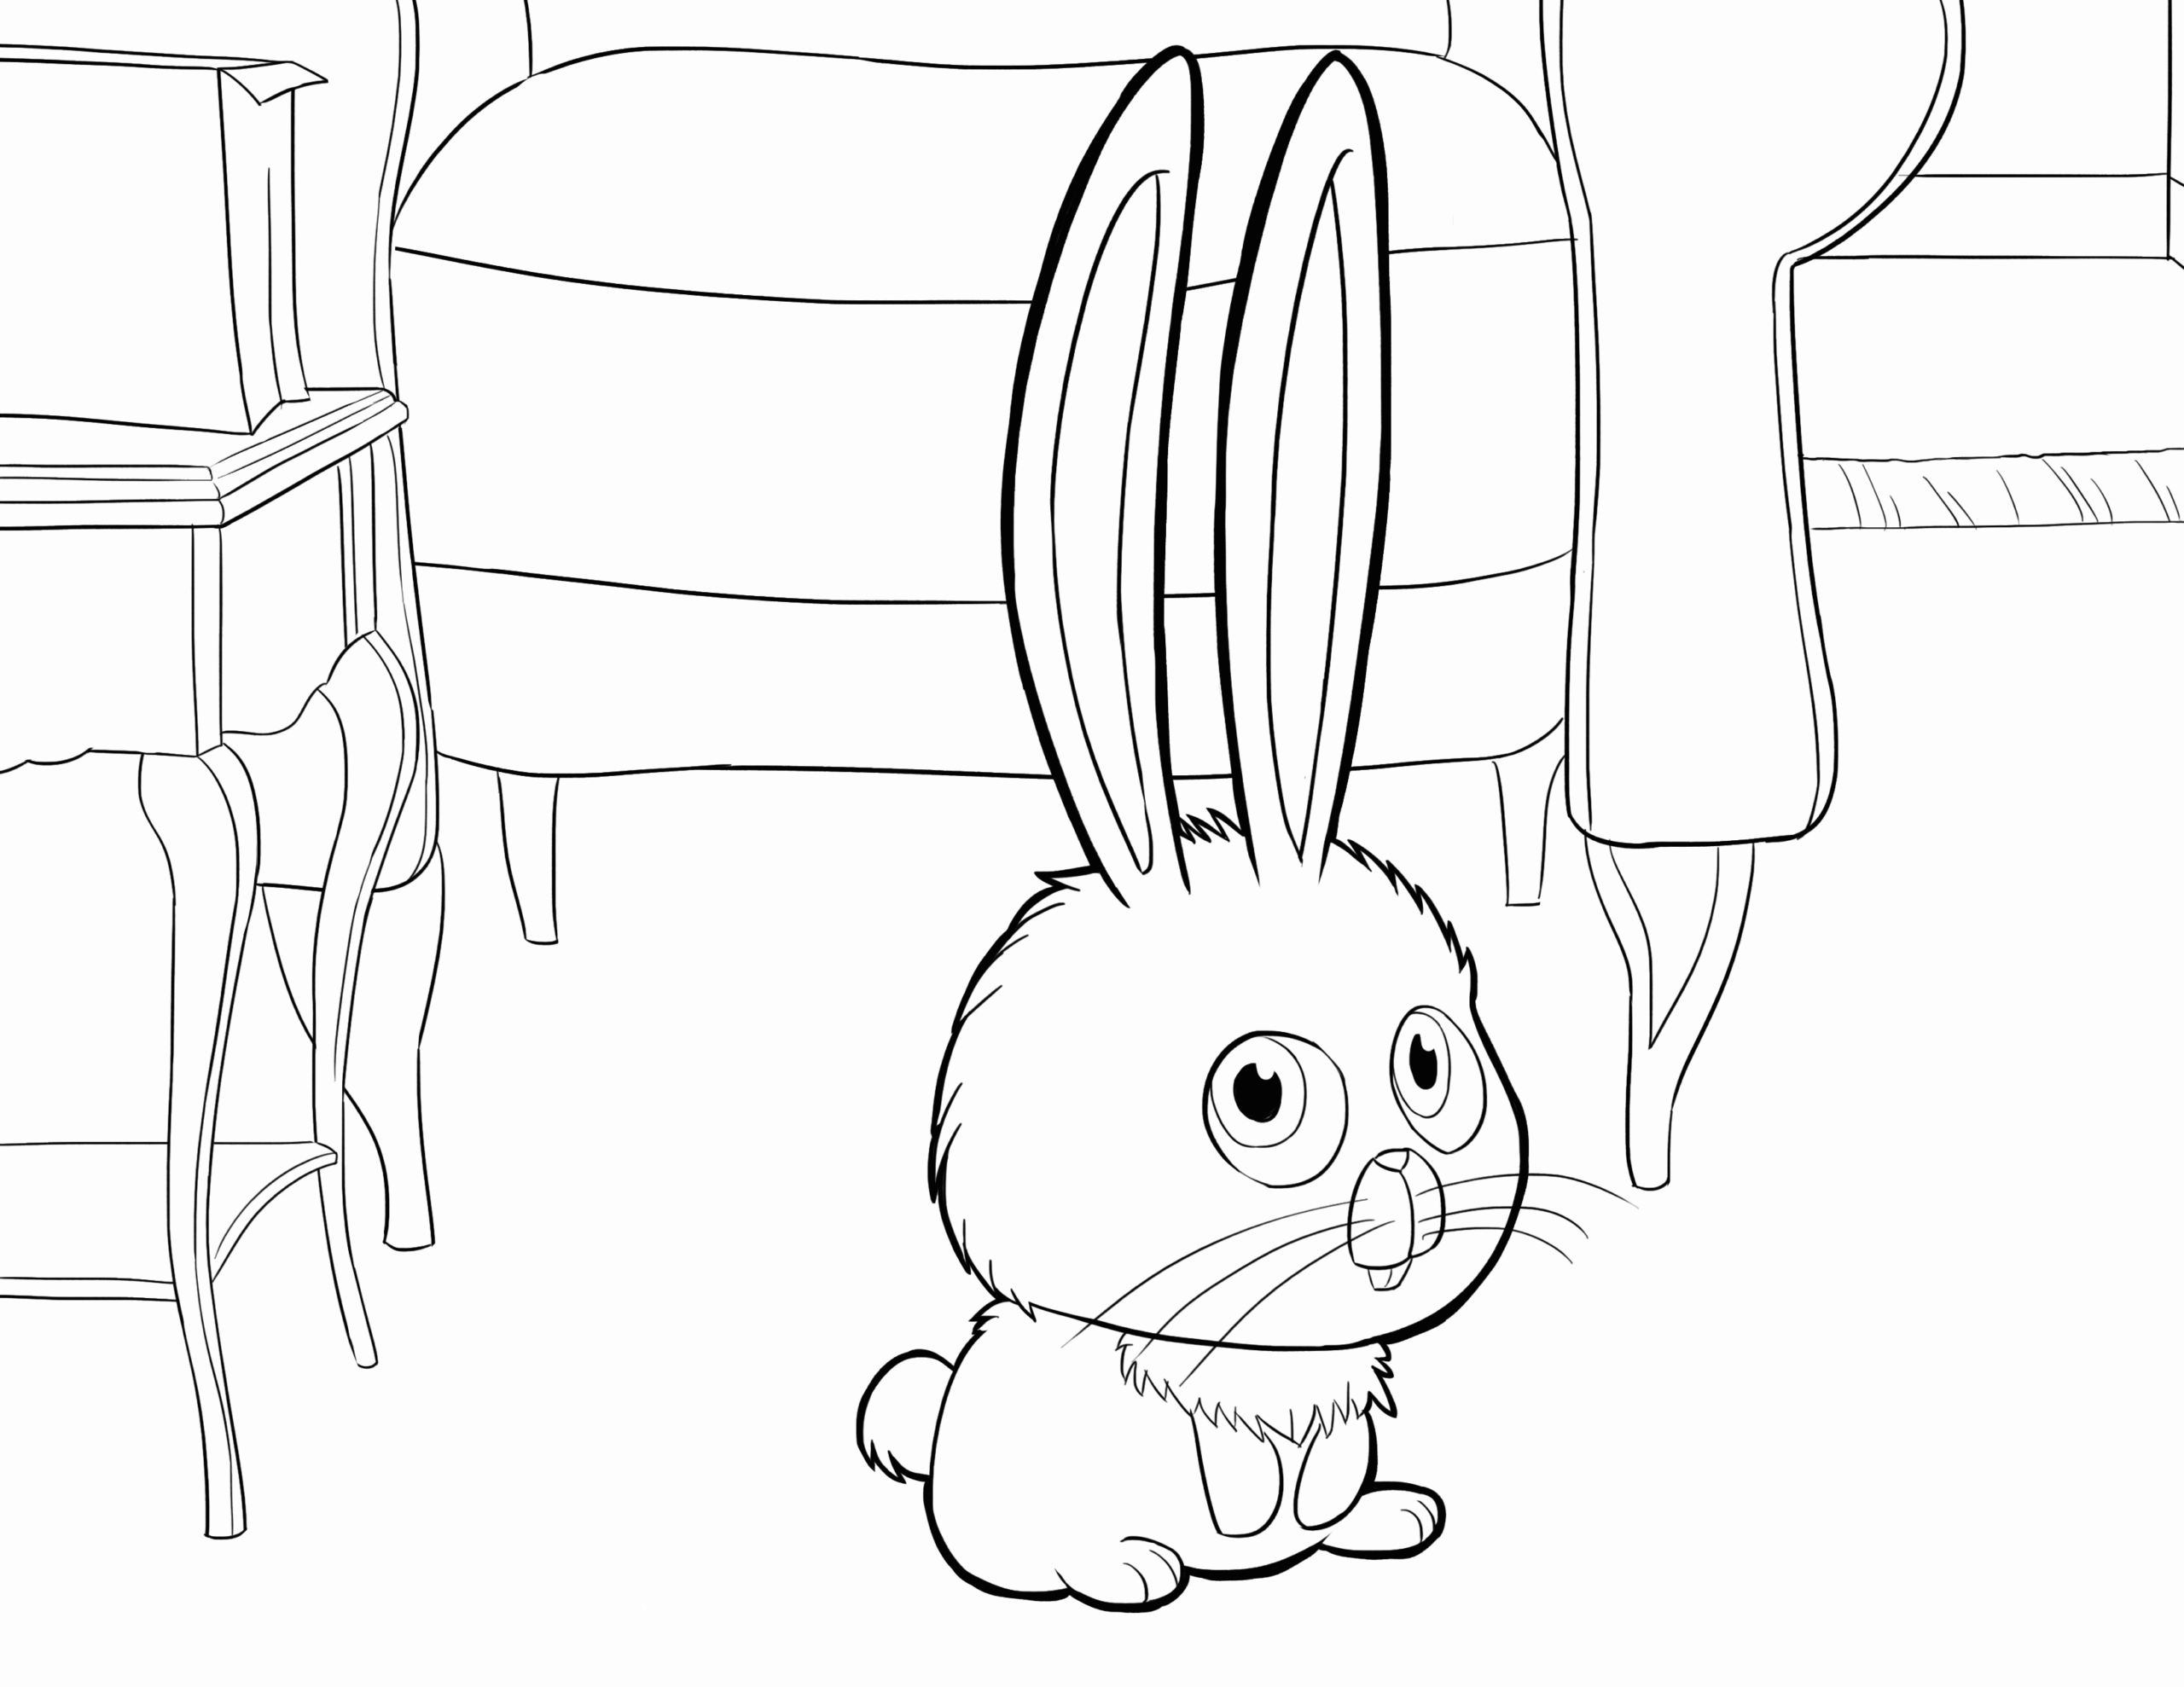 The Secret Life of Pets Coloring Pages TV Film Cute Snowball Printable 2020 09484 Coloring4free